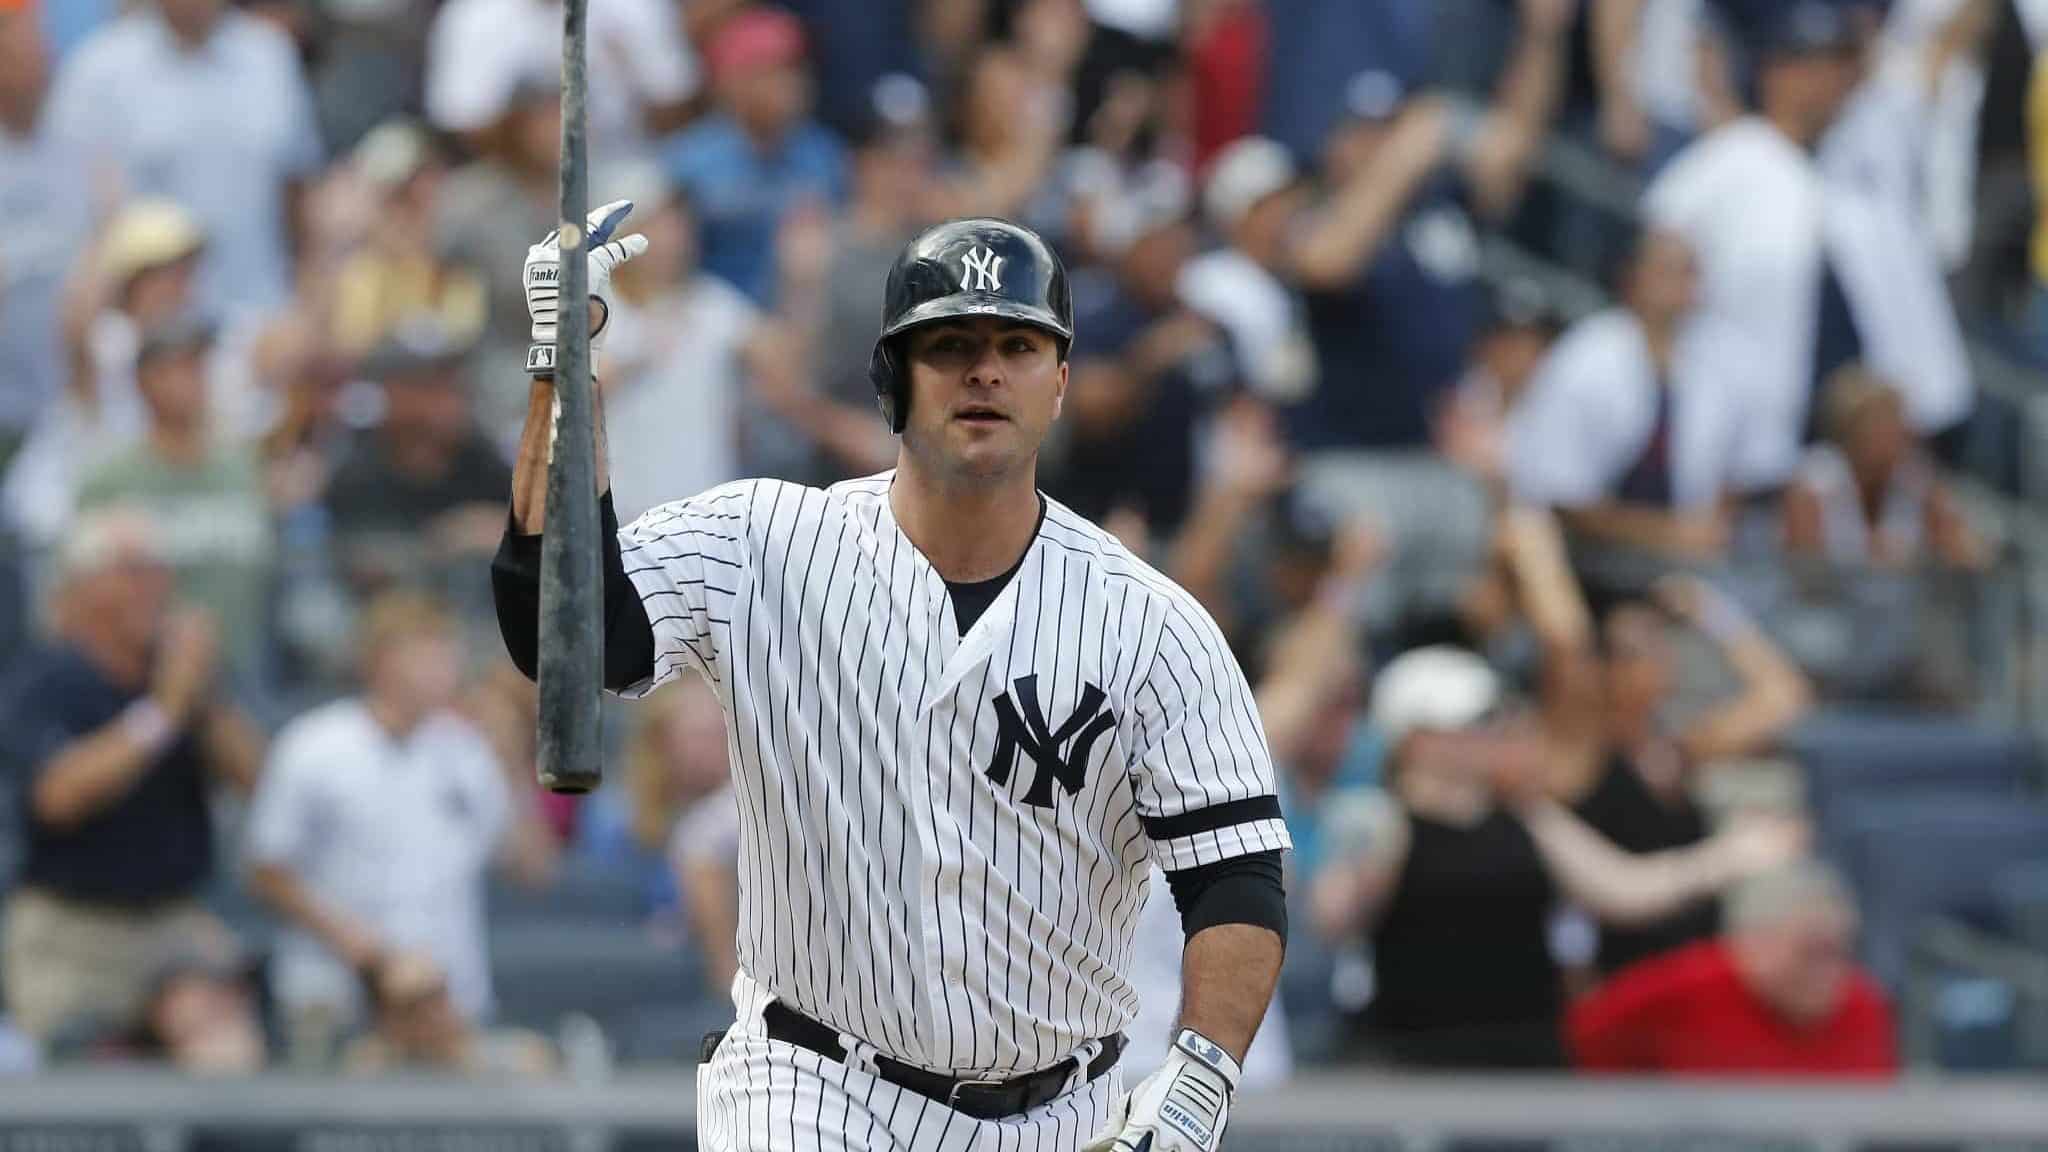 NEW YORK, NEW YORK - SEPTEMBER 01: Mike Ford #36 of the New York Yankees reacts after his ninth inning pinch hit game winning home run against the Oakland Athletics at Yankee Stadium on September 01, 2019 in New York City.